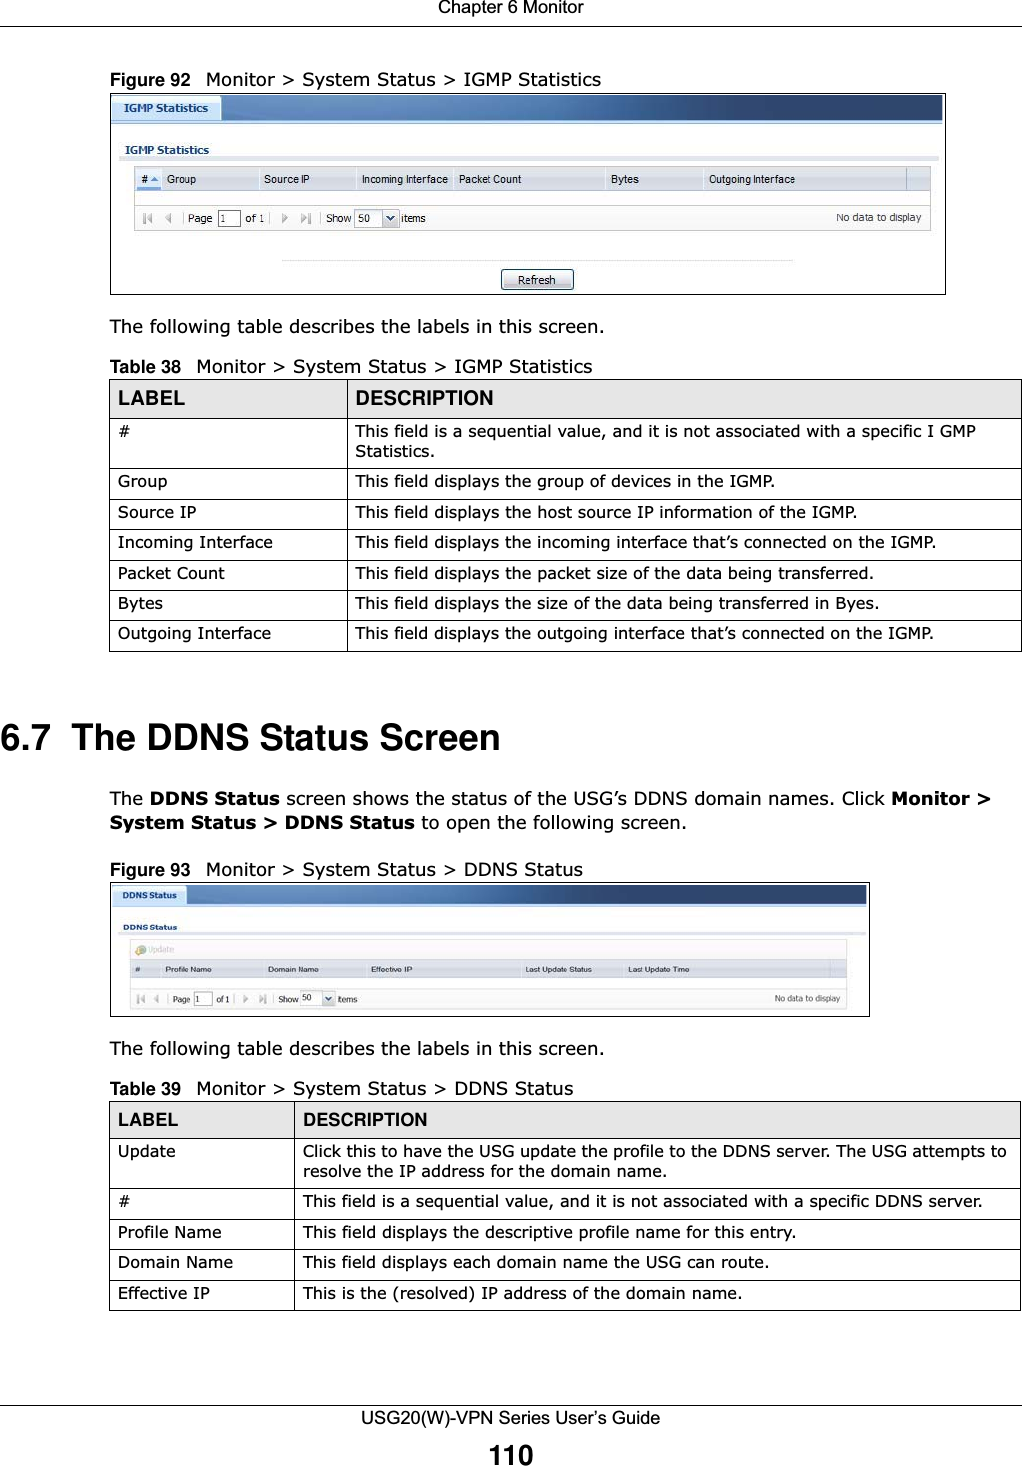 Chapter 6 MonitorUSG20(W)-VPN Series User’s Guide110Figure 92   Monitor &gt; System Status &gt; IGMP StatisticsThe following table describes the labels in this screen.6.7  The DDNS Status ScreenThe DDNS Status screen shows the status of the USG’s DDNS domain names. Click Monitor &gt; System Status &gt; DDNS Status to open the following screen.Figure 93   Monitor &gt; System Status &gt; DDNS Status        The following table describes the labels in this screen. Table 38   Monitor &gt; System Status &gt; IGMP StatisticsLABEL DESCRIPTION# This field is a sequential value, and it is not associated with a specific I GMP Statistics.Group This field displays the group of devices in the IGMP. Source IP This field displays the host source IP information of the IGMP.Incoming Interface This field displays the incoming interface that’s connected on the IGMP.Packet Count This field displays the packet size of the data being transferred.Bytes This field displays the size of the data being transferred in Byes.Outgoing Interface This field displays the outgoing interface that’s connected on the IGMP.Table 39   Monitor &gt; System Status &gt; DDNS StatusLABEL DESCRIPTIONUpdate Click this to have the USG update the profile to the DDNS server. The USG attempts to resolve the IP address for the domain name.# This field is a sequential value, and it is not associated with a specific DDNS server.Profile Name This field displays the descriptive profile name for this entry.Domain Name This field displays each domain name the USG can route.Effective IP This is the (resolved) IP address of the domain name. 